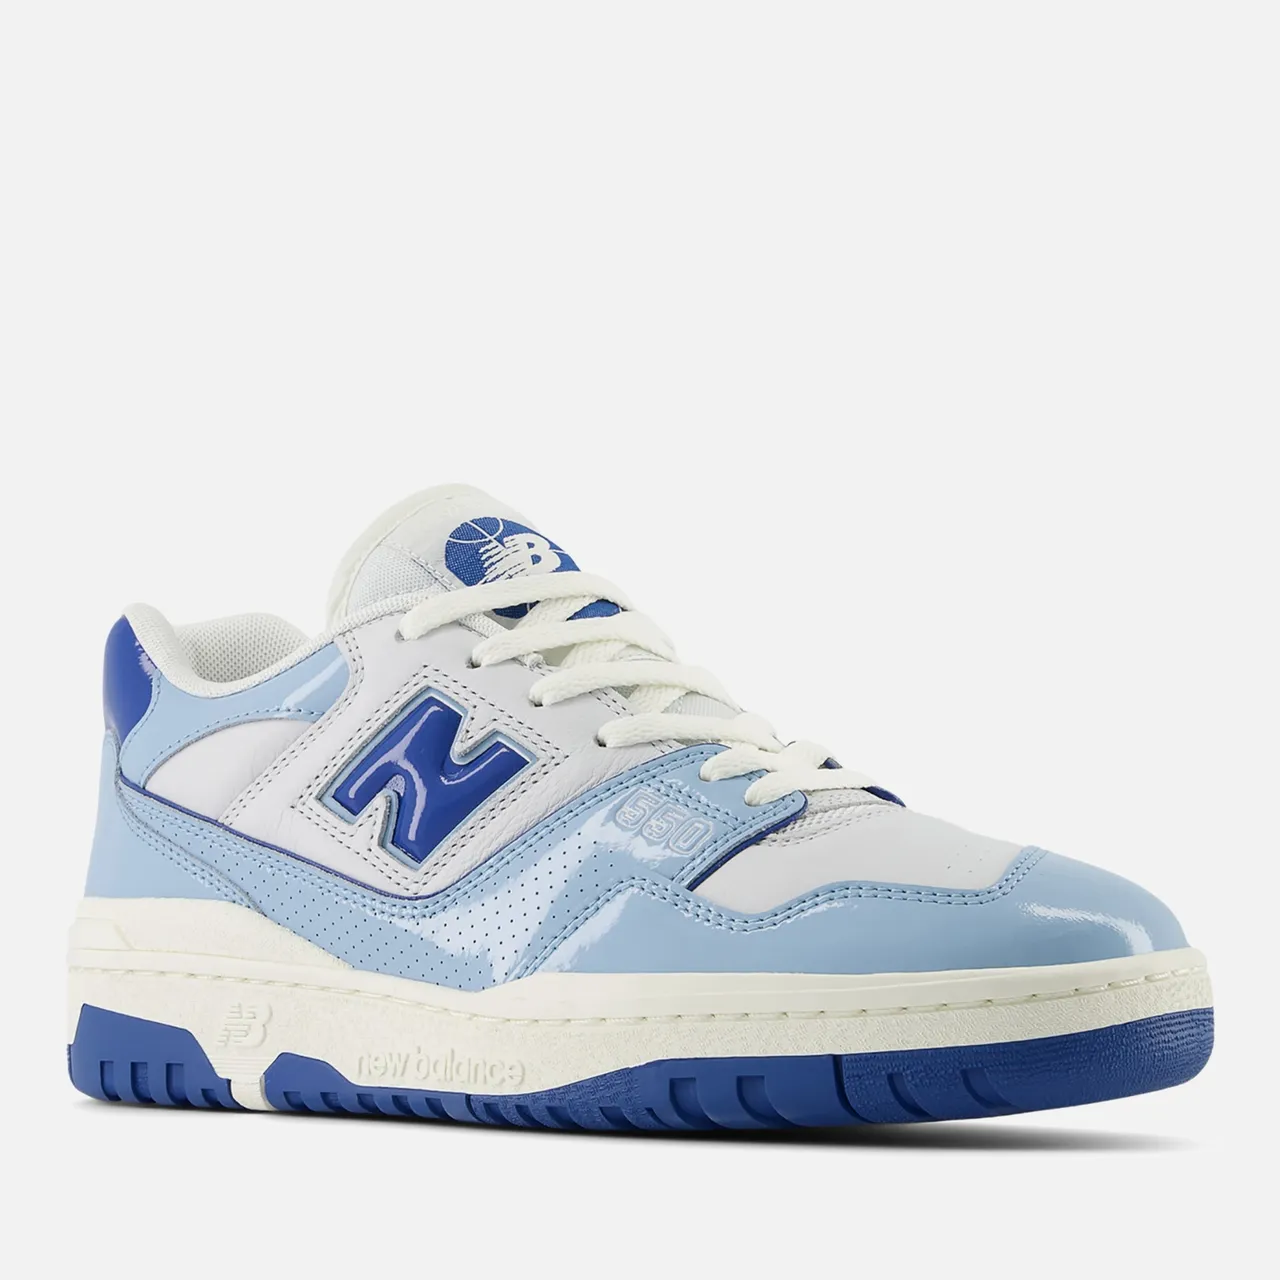 New Balance Men's 550 Leather Trainers - UK